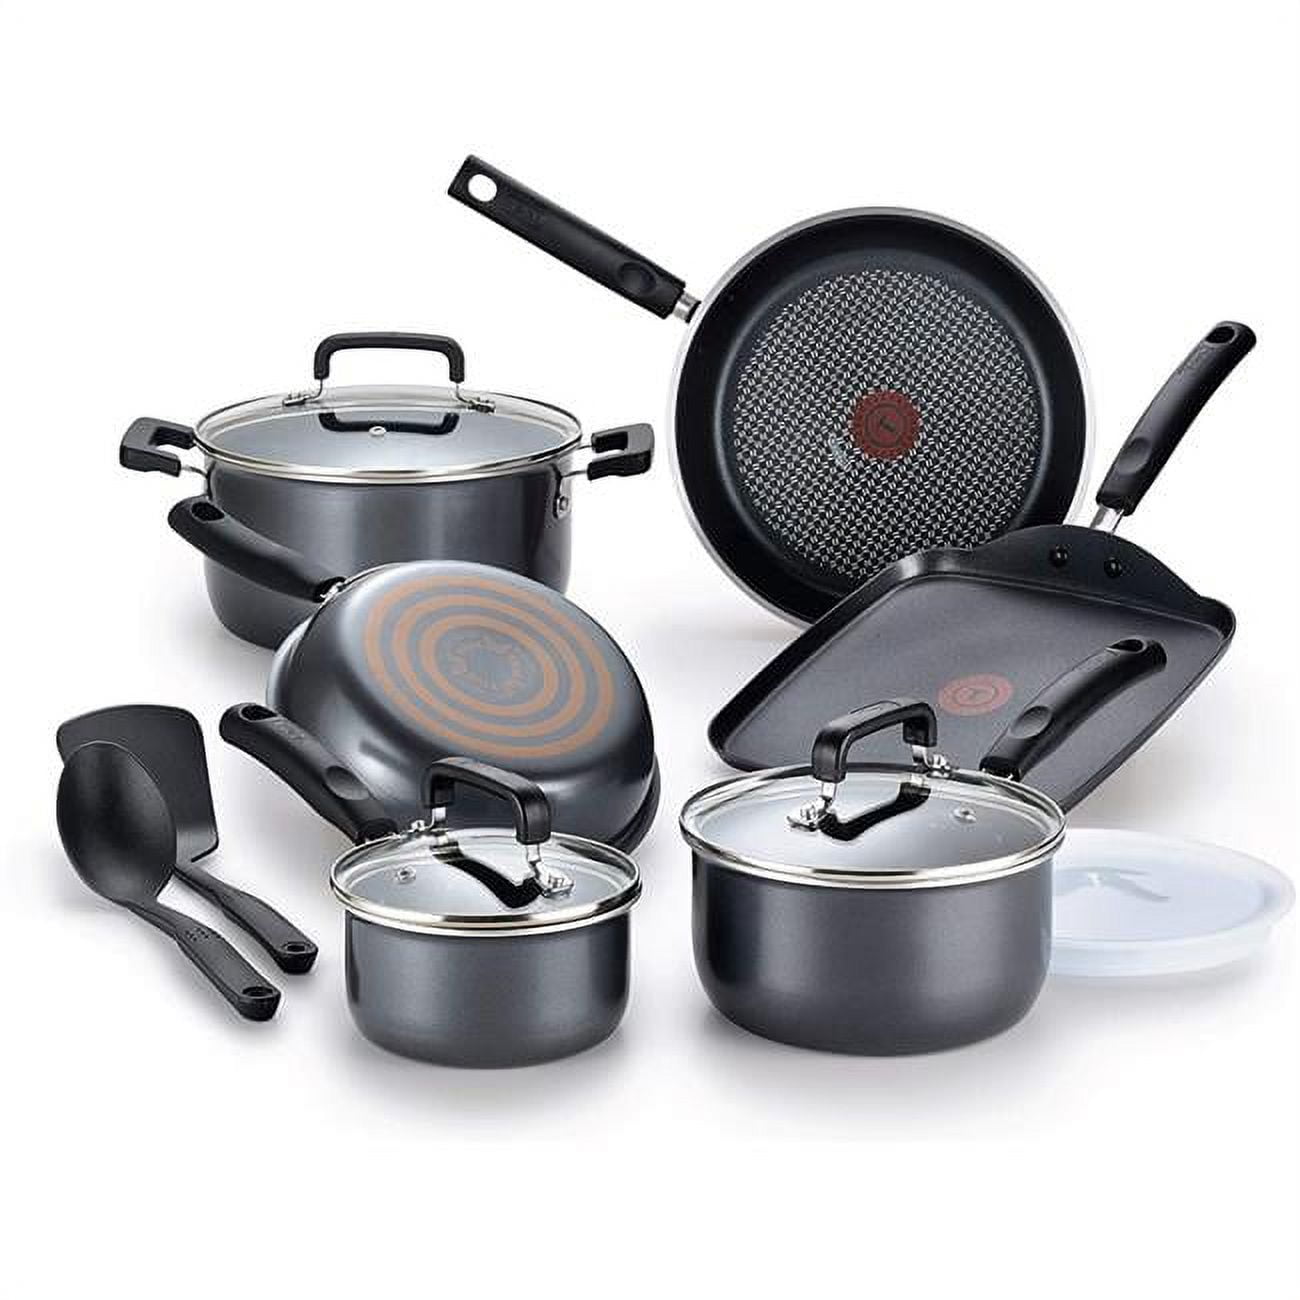 T-FAL T-fal Ingenio Preference, 4 Pcs Stainless Steel Cookware Set,  L900S464 L900S464